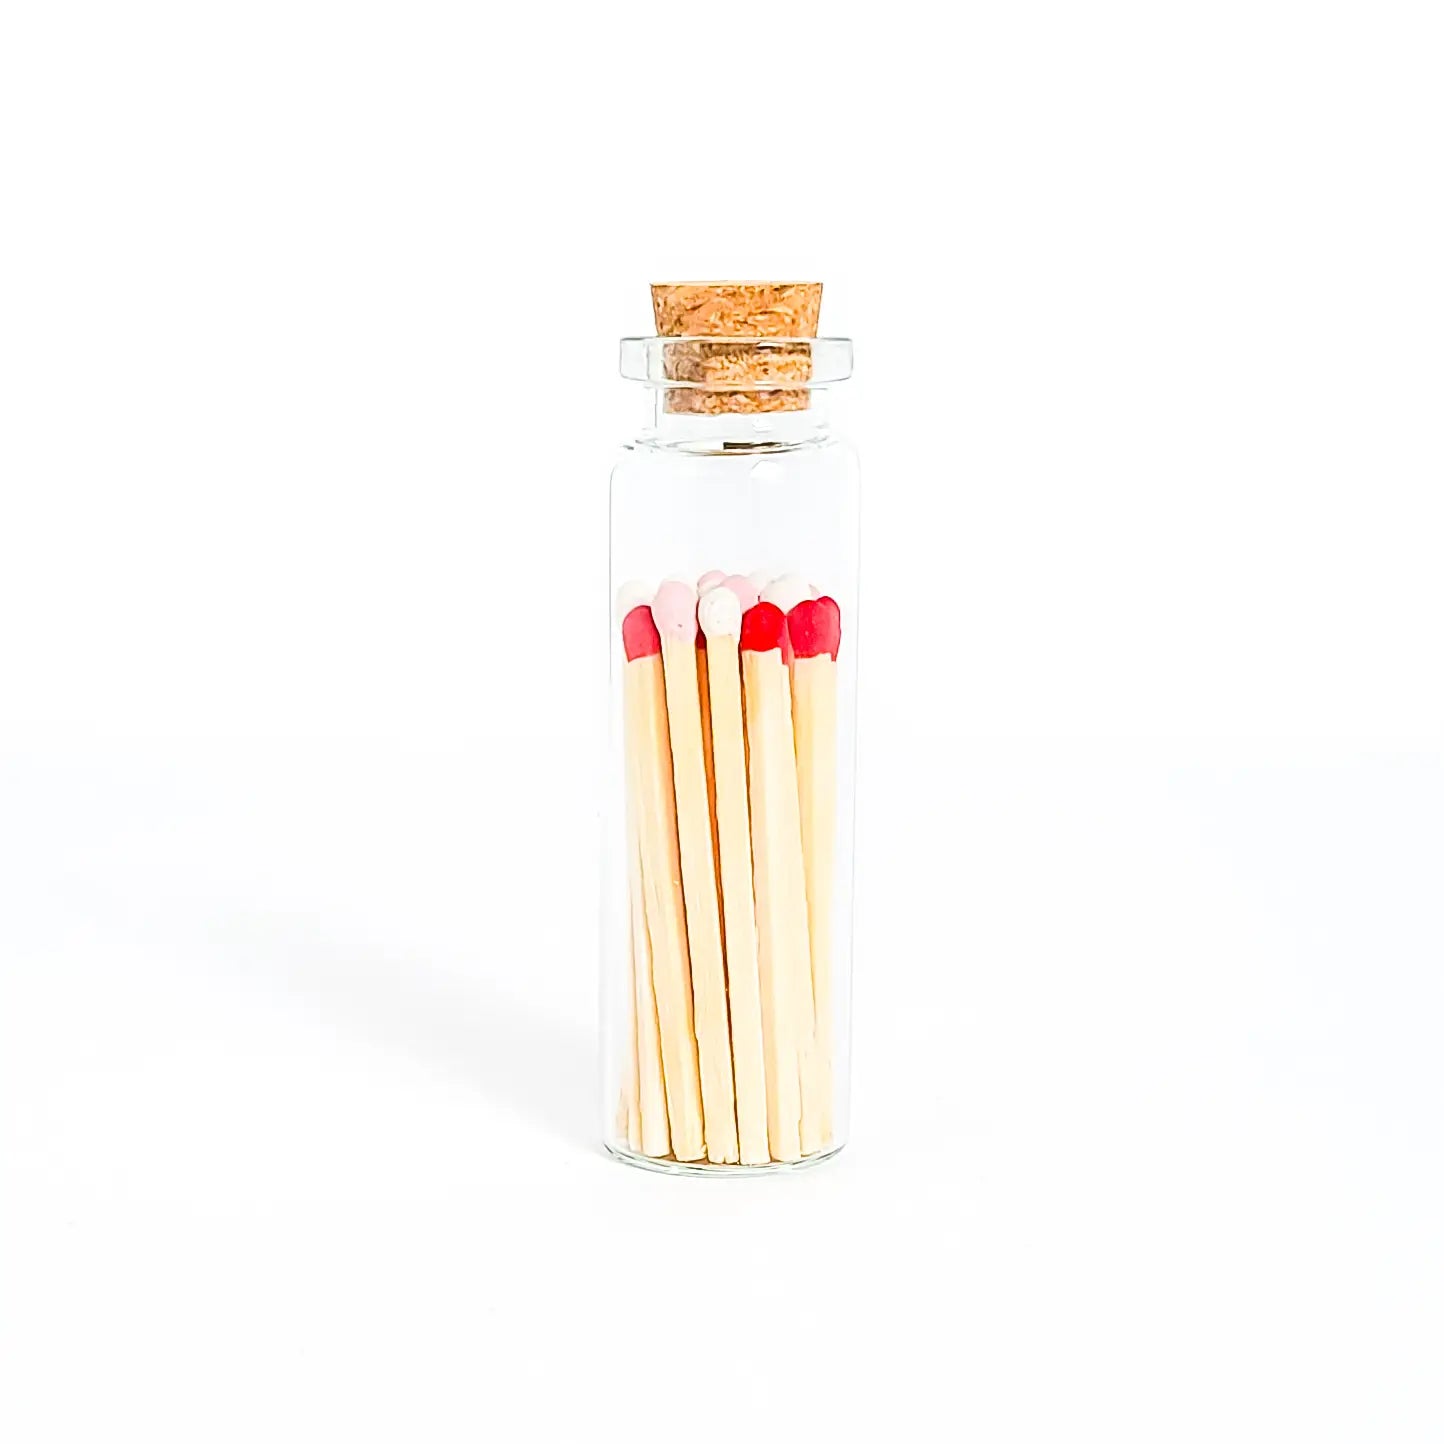 Matches in corked vial